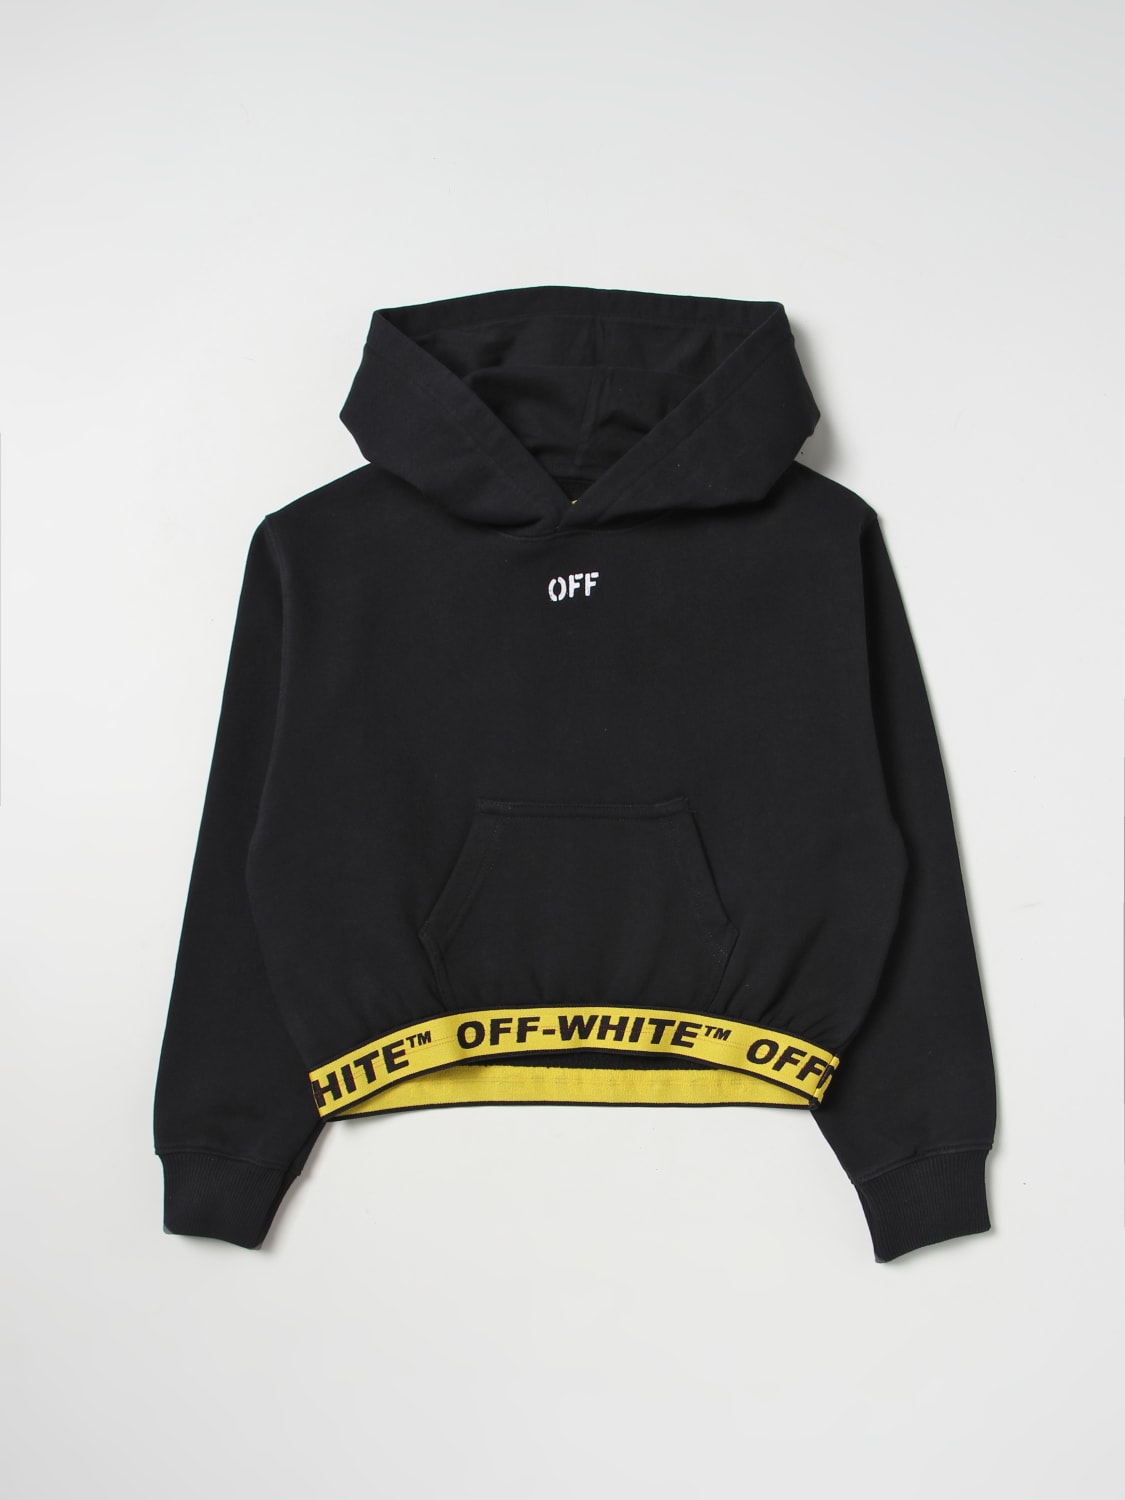 Aggressiv Kemiker Accord OFF-WHITE: cotton sweatshirt - Black | Off-White sweater OGBB005C99FLE002  online on GIGLIO.COM